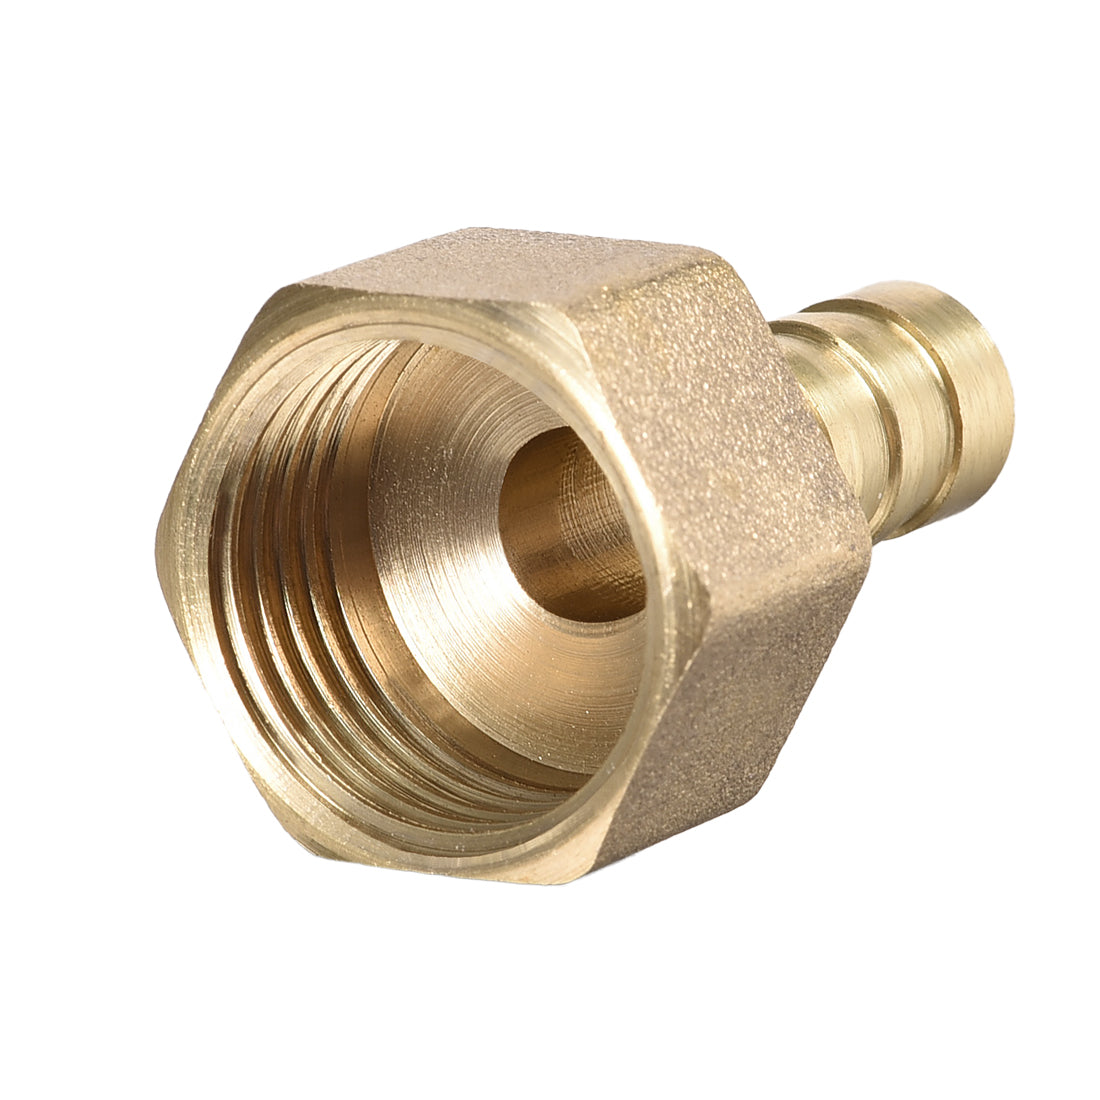 uxcell Uxcell Brass Barb Hose Fitting Connector Adapter 10mmx36mm Barbed x G1/2 Female Pipe 3pcs